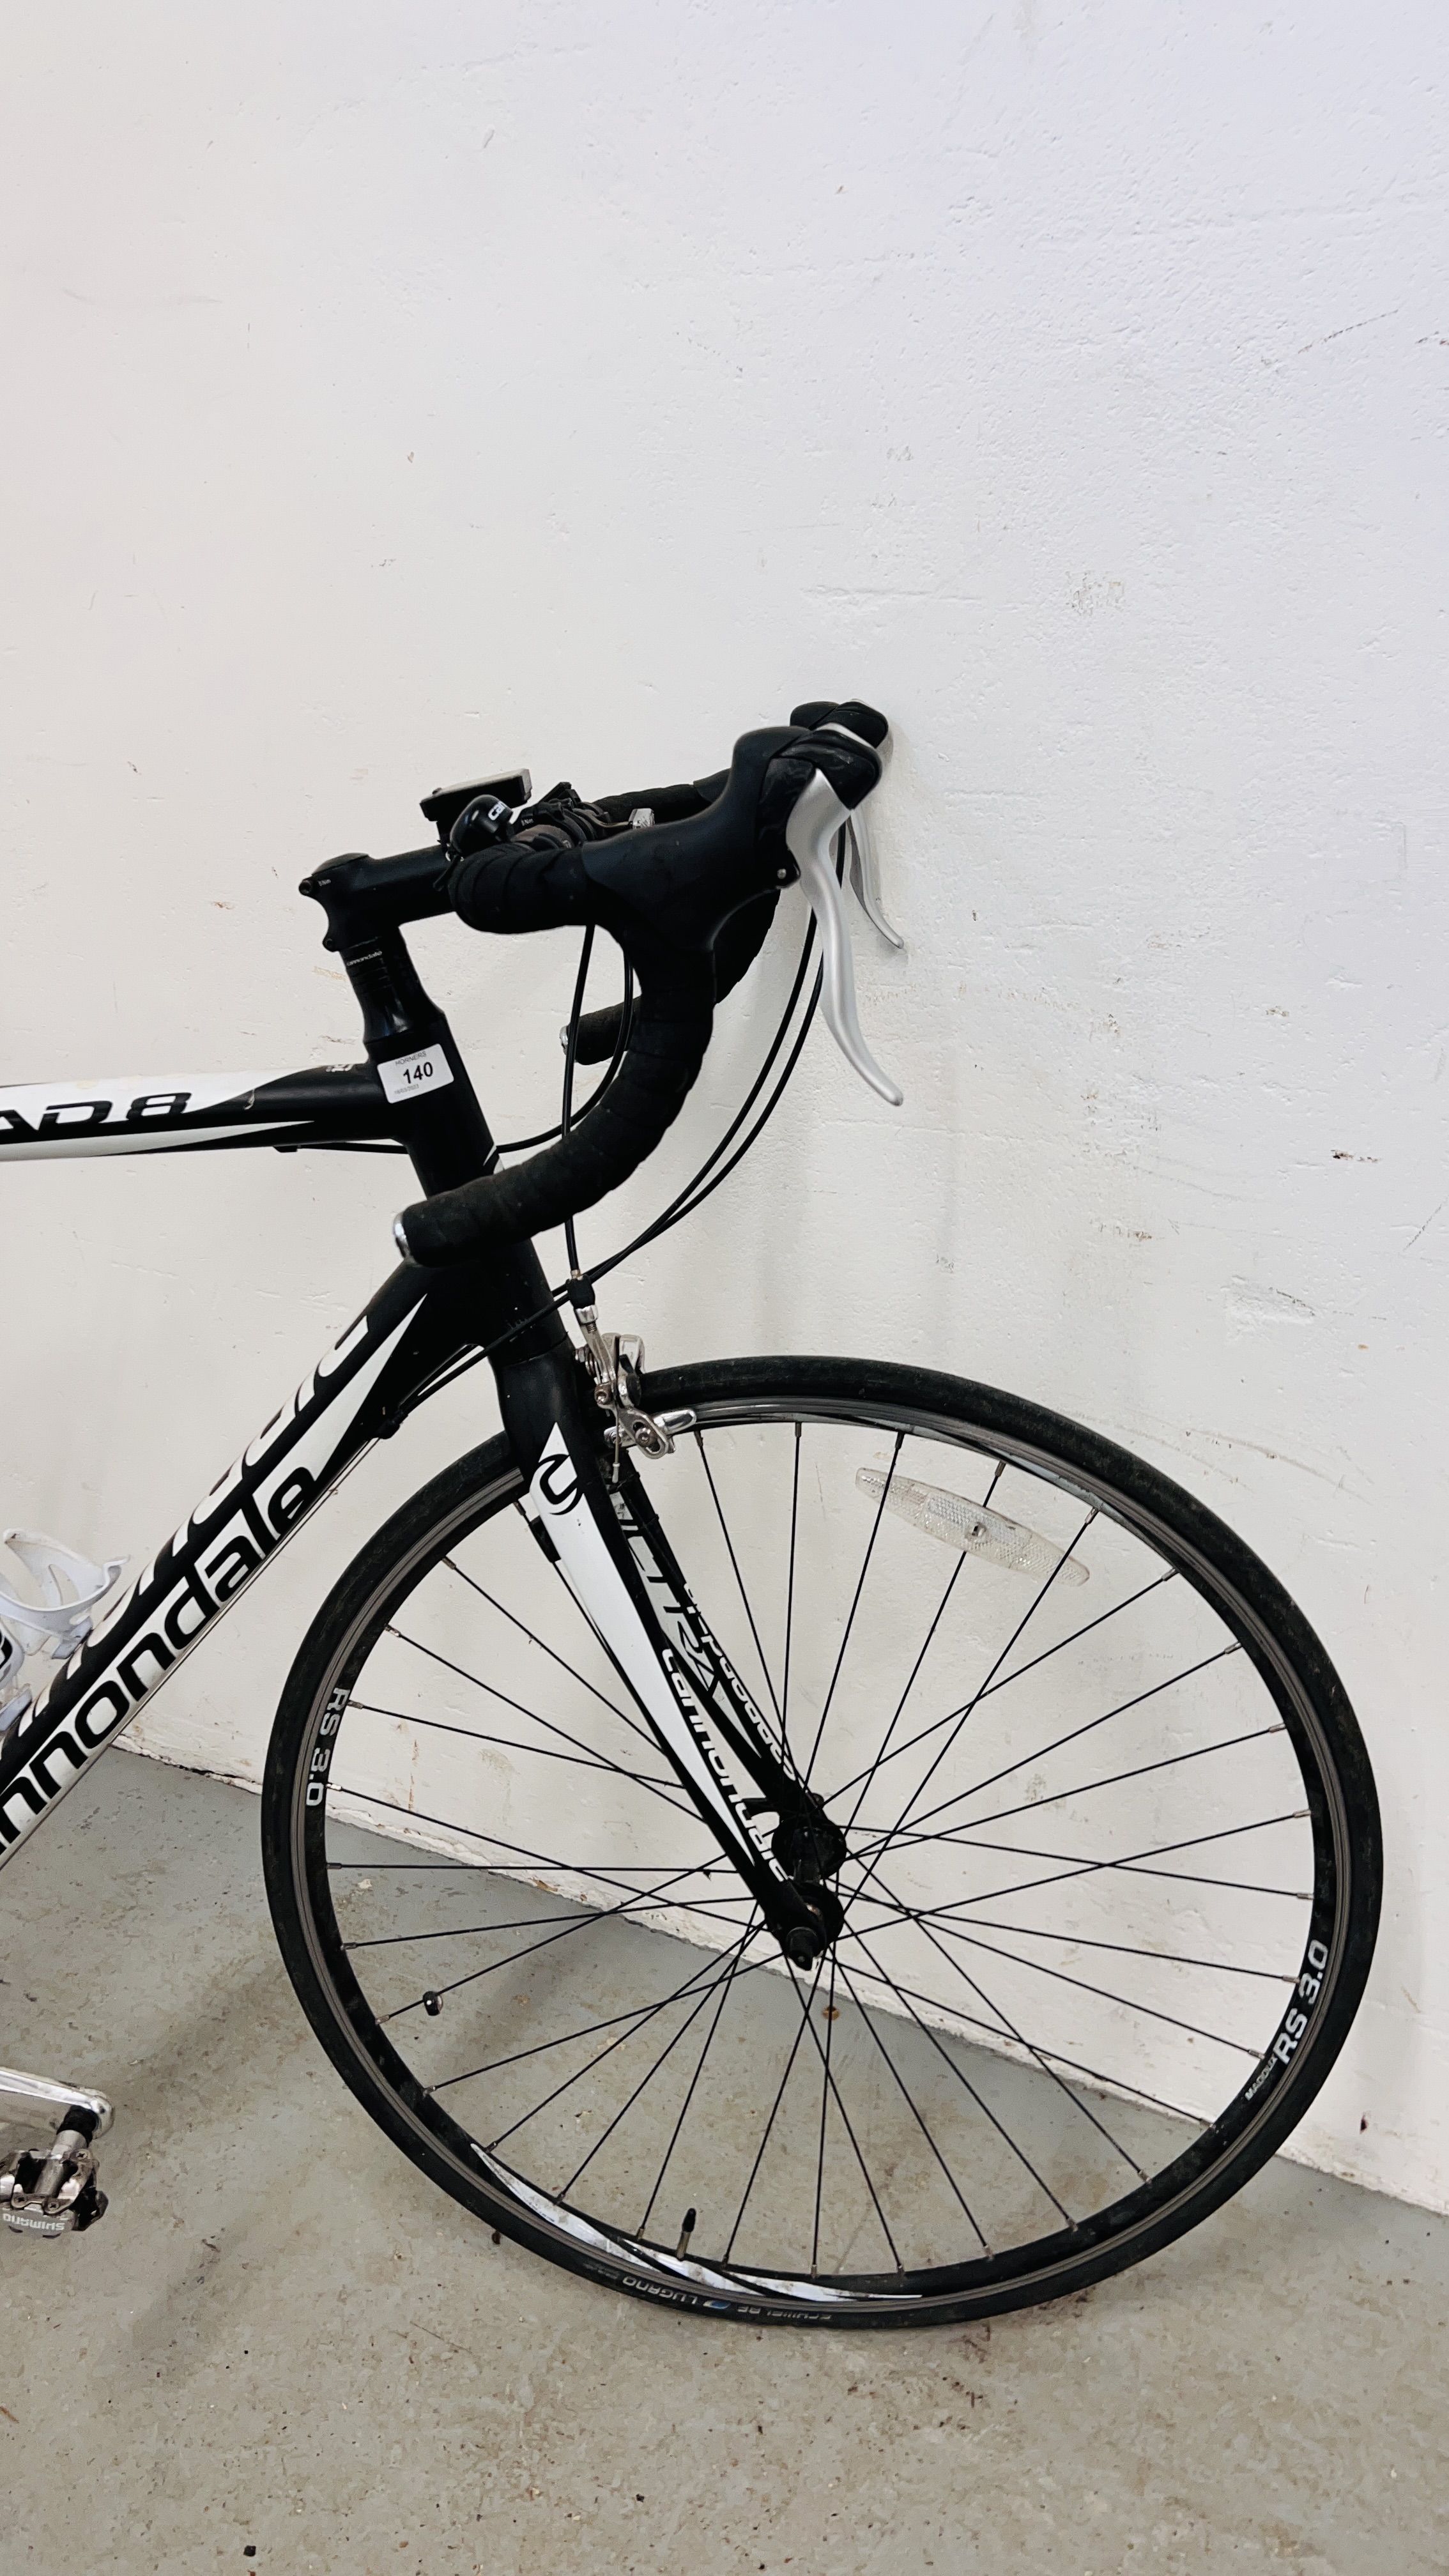 A GENTS CANNONDALE CAAD 8 RACING BIKE. - Image 2 of 11